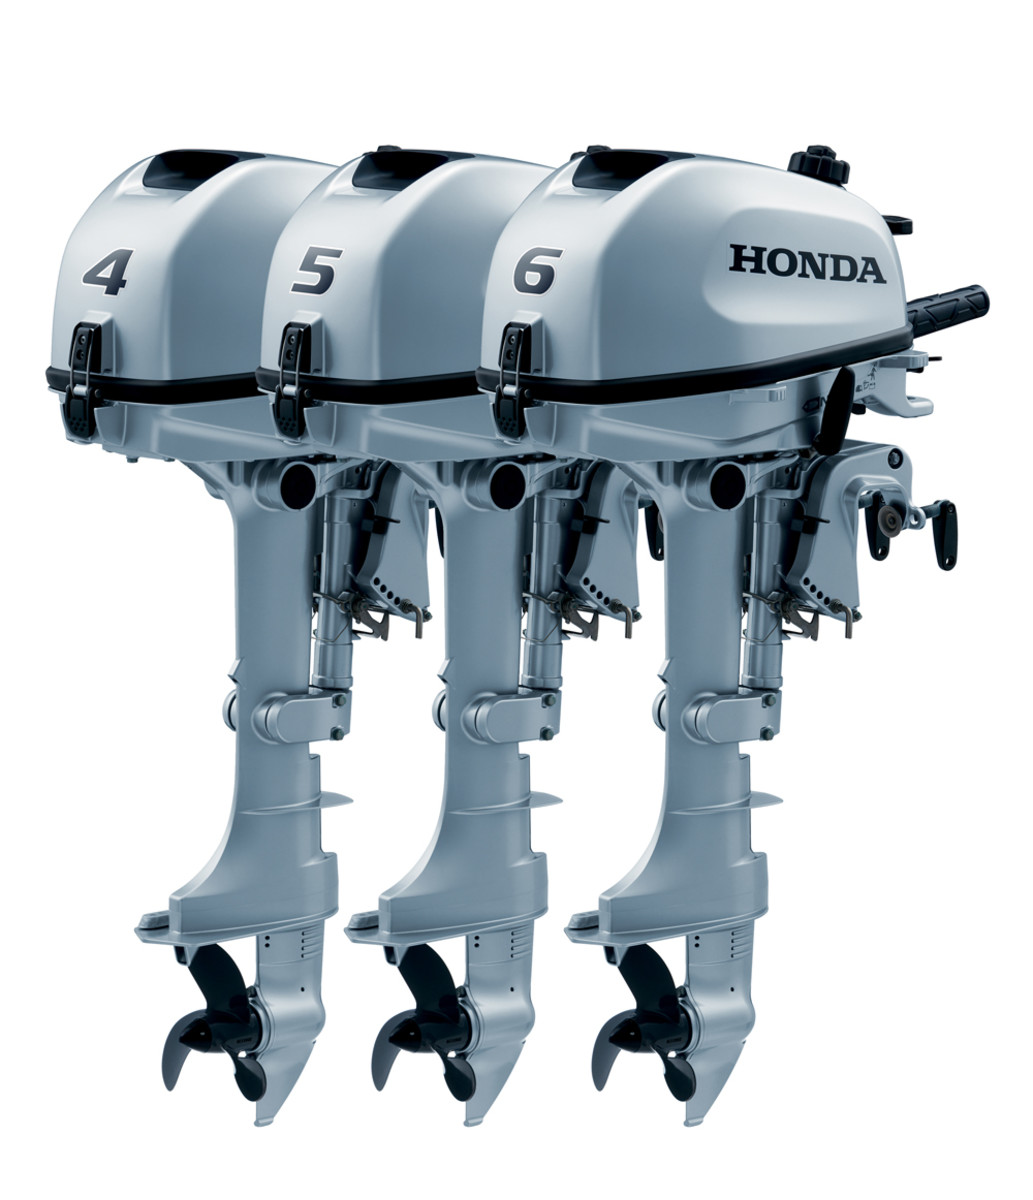 Honda Marine is unveiling new portable four-stroke outboard engines with its BF4 and BF6 models and has redesigned its BF5.